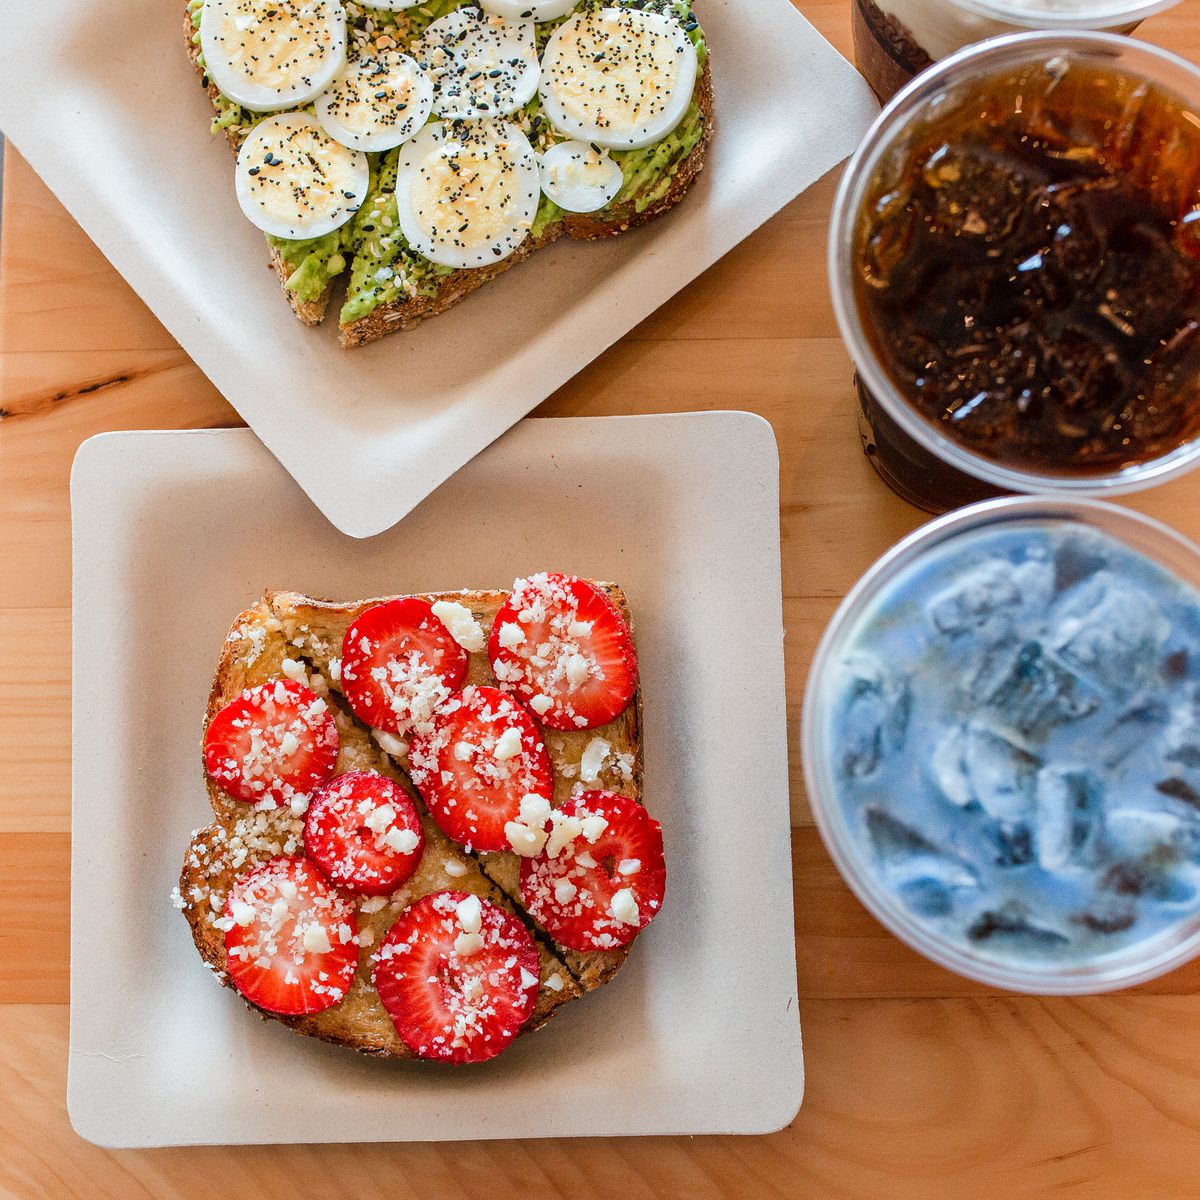 Plated avocado toast and strawberry toast and two beverages with ice, one brown and one blue